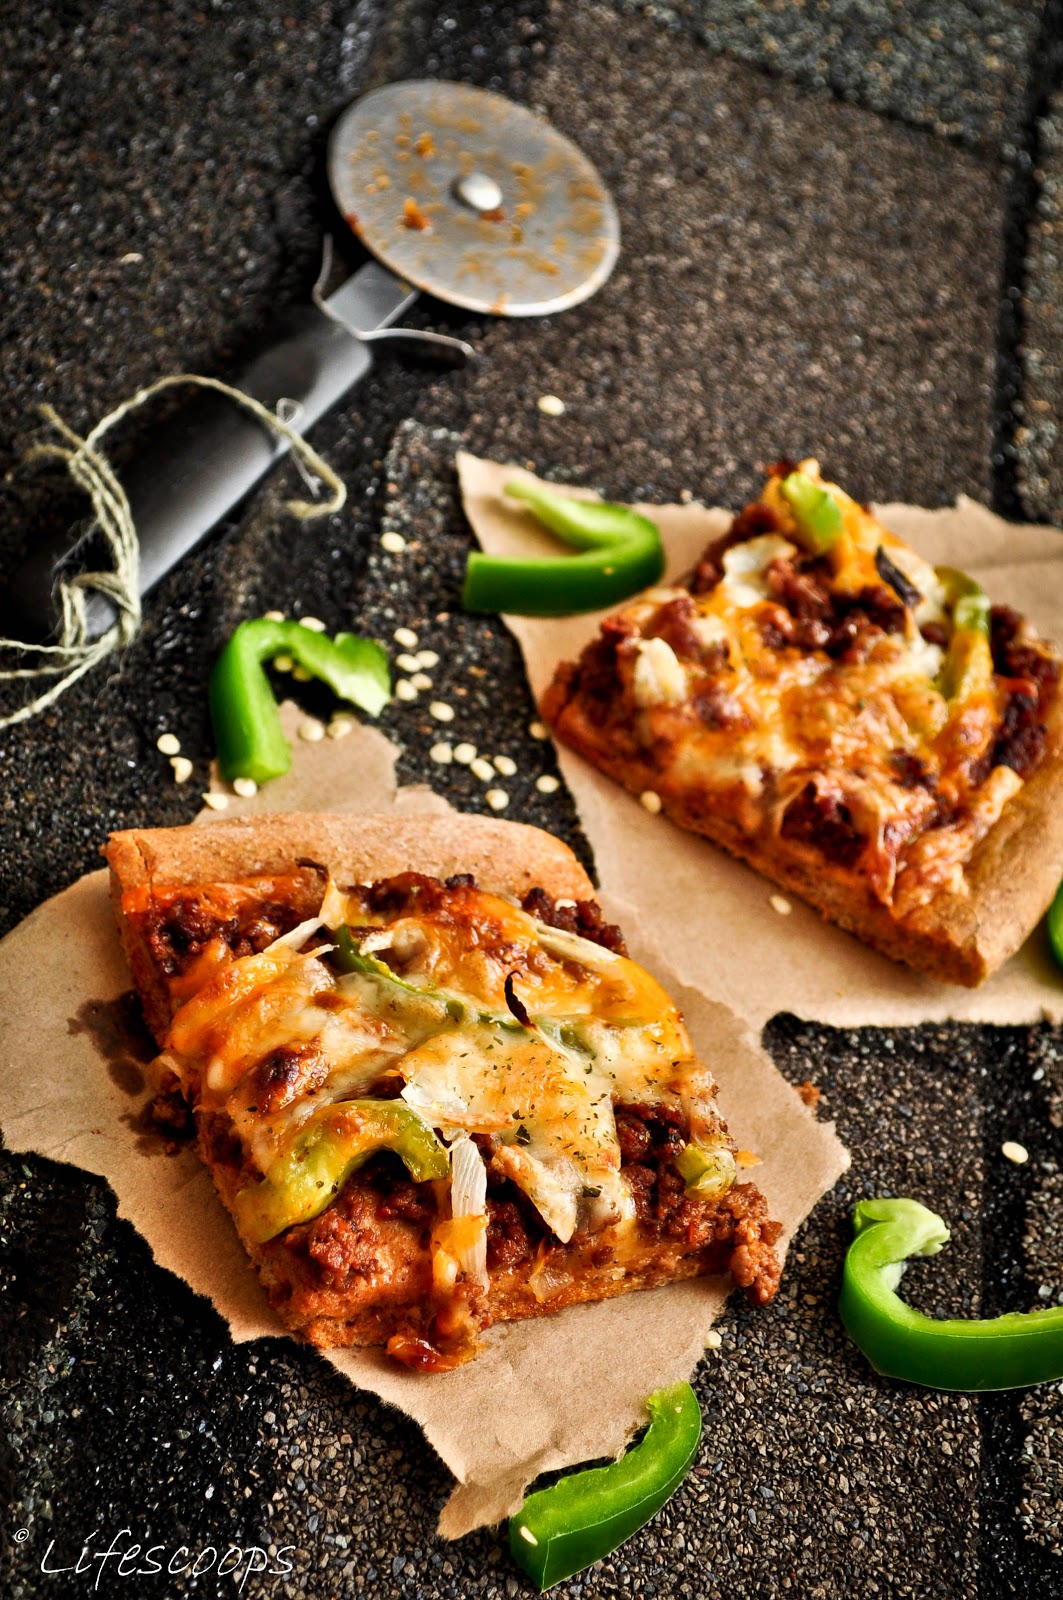 Life Scoops: Spiced Sloppy Joe Pizza on Whole Wheat Crust/ Indian Style ...